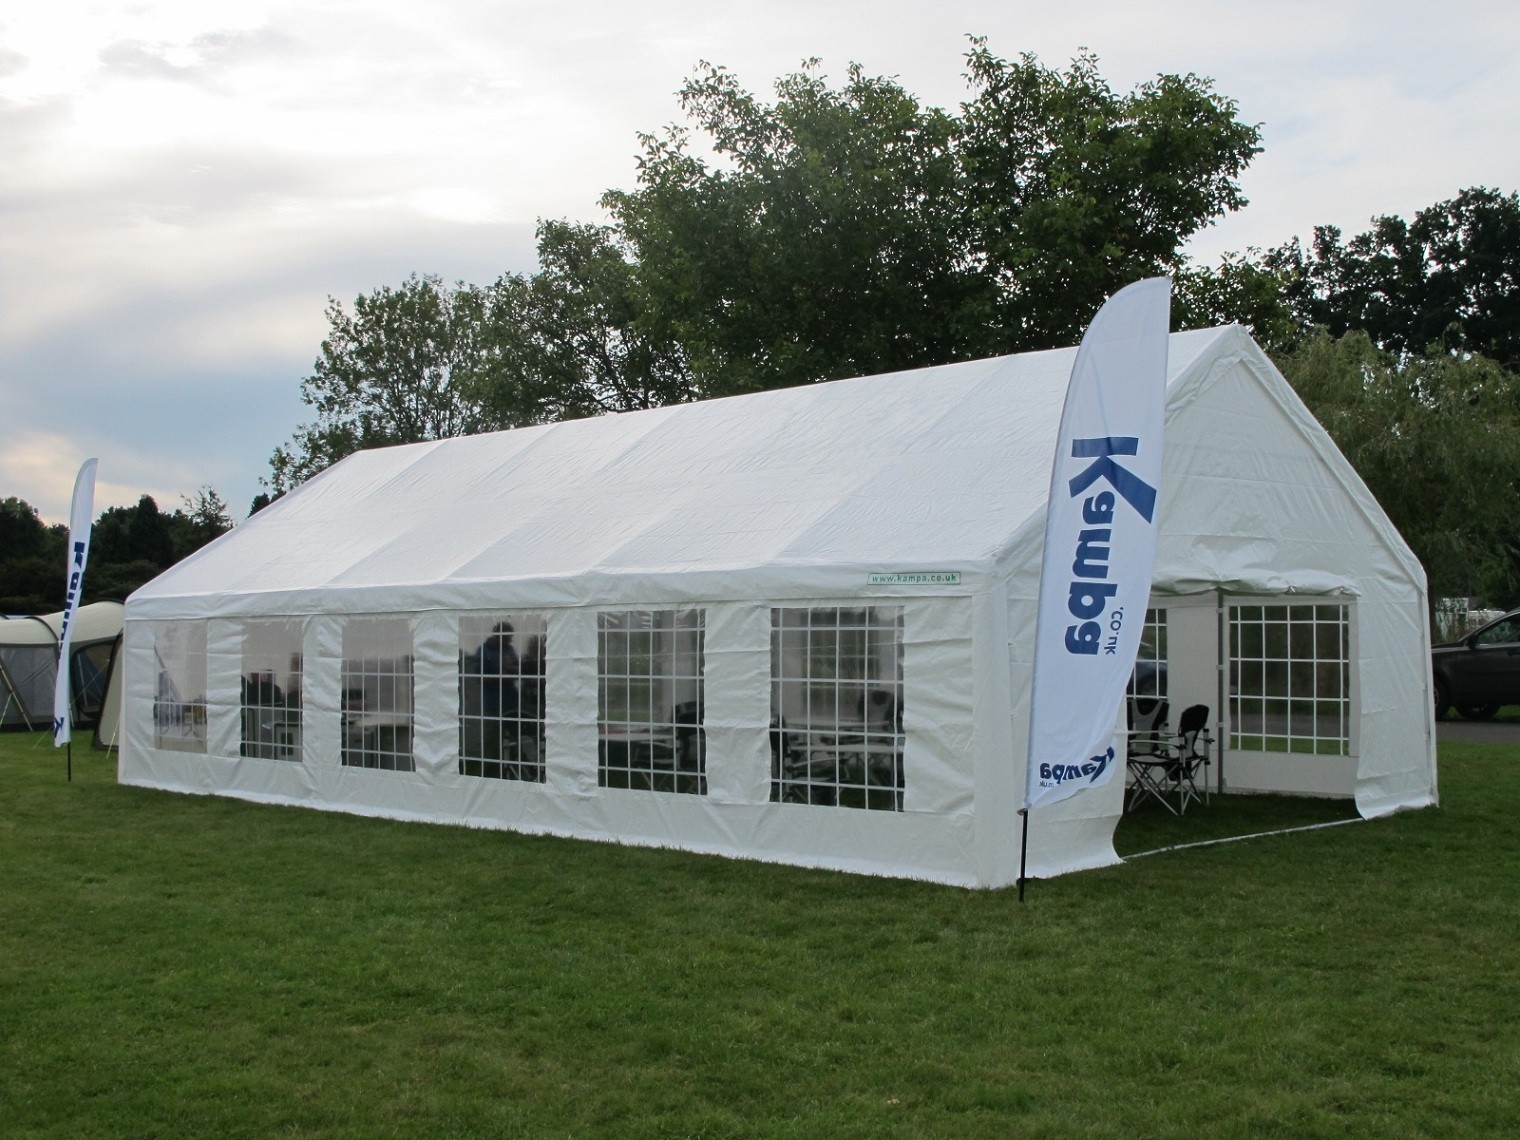 Kampa Original Party Tent - 3m x 6m from Kampa for £500.00